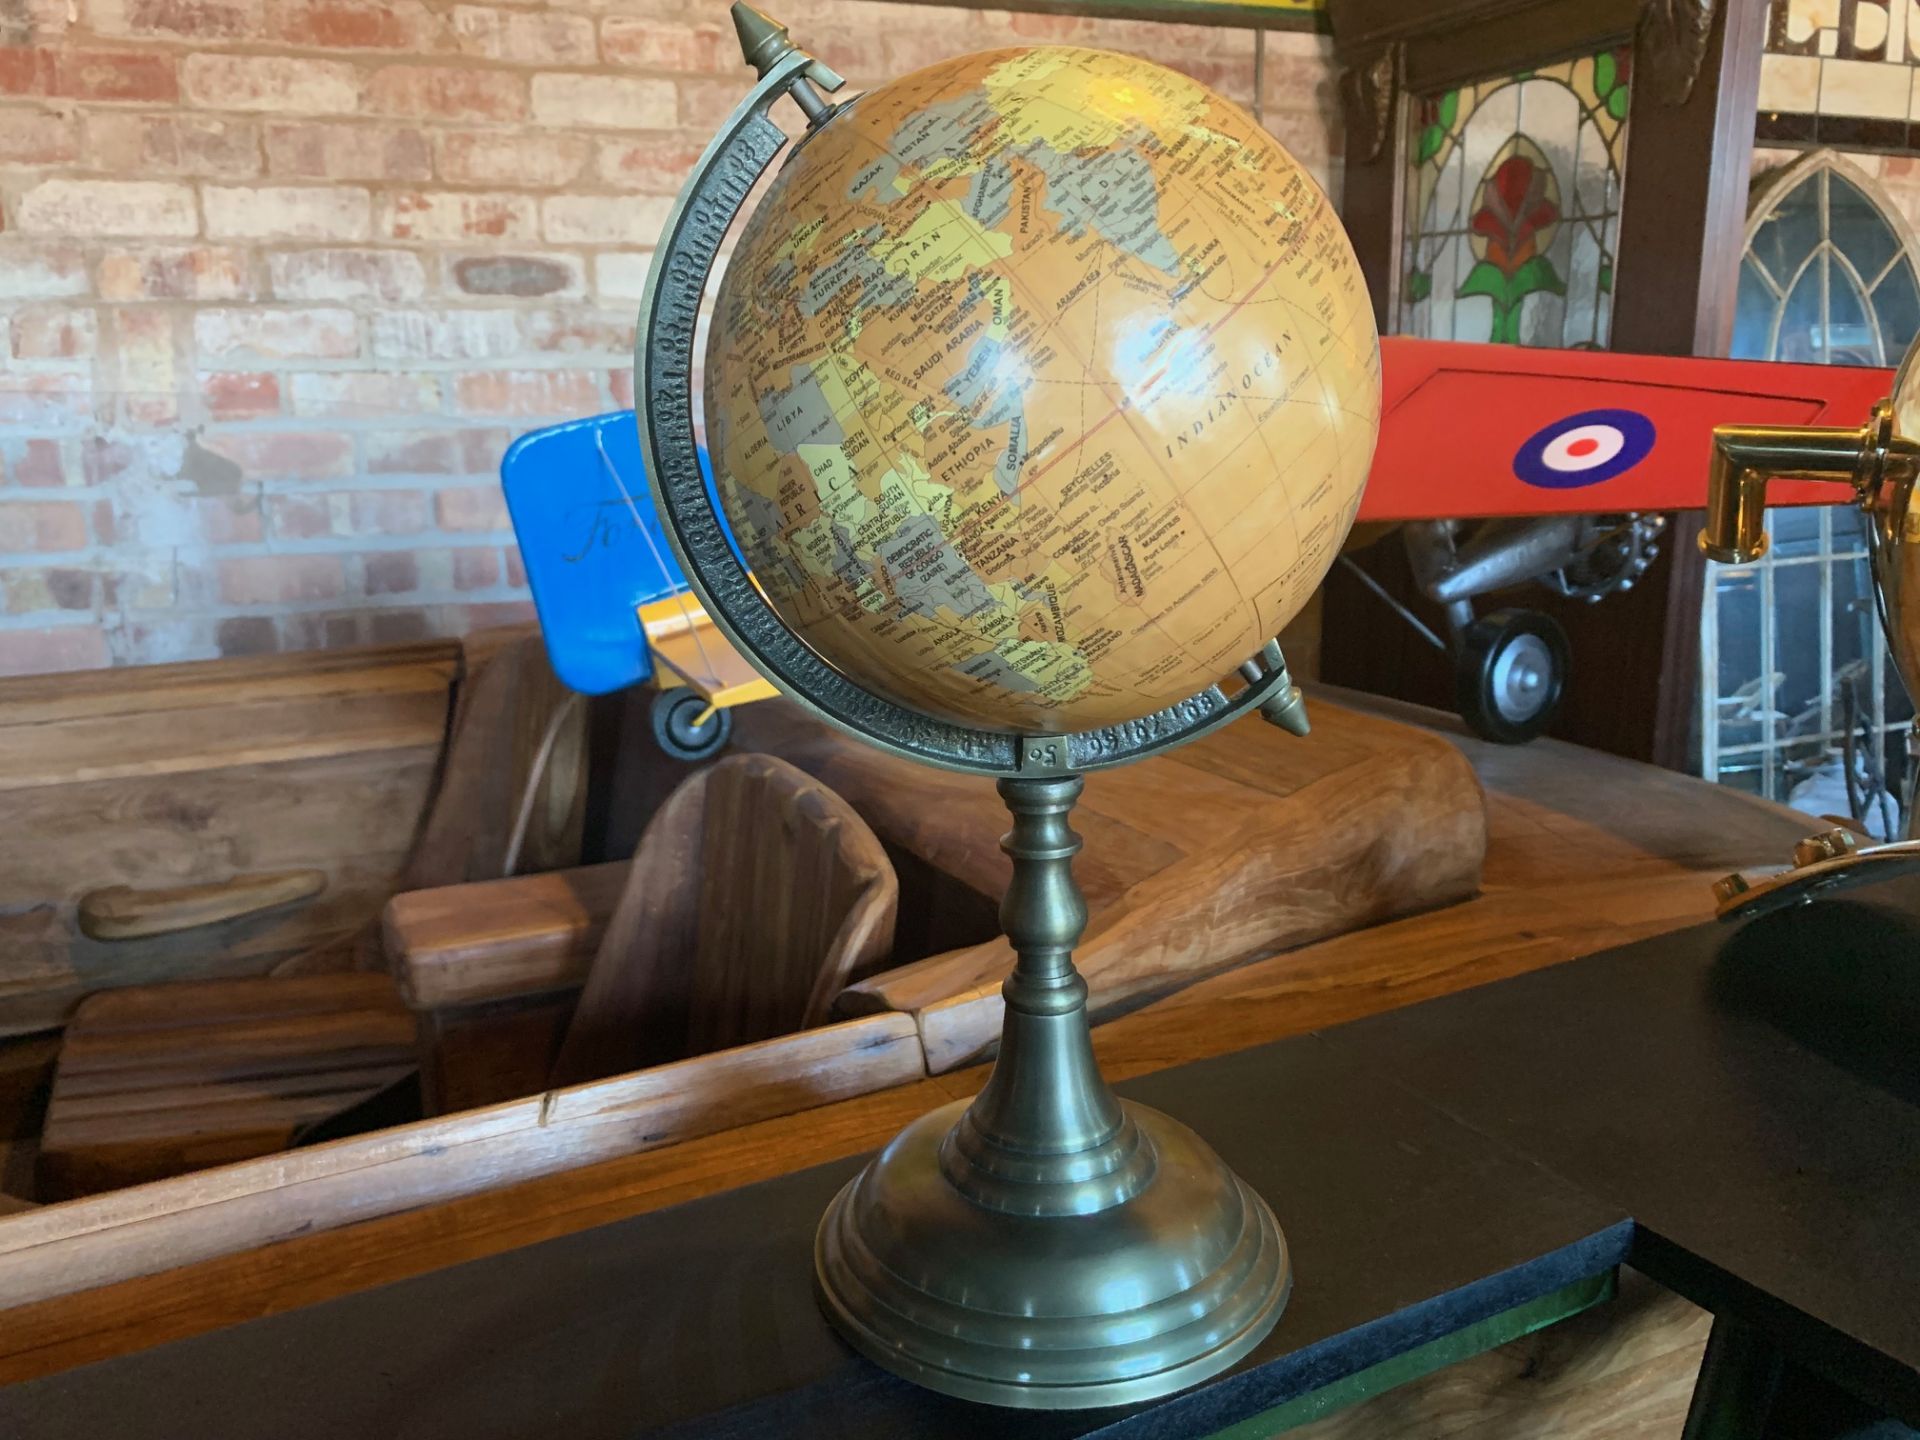 BOXED NEW EDUCATIONAL GLOBE ON BRASS FINISH STAND